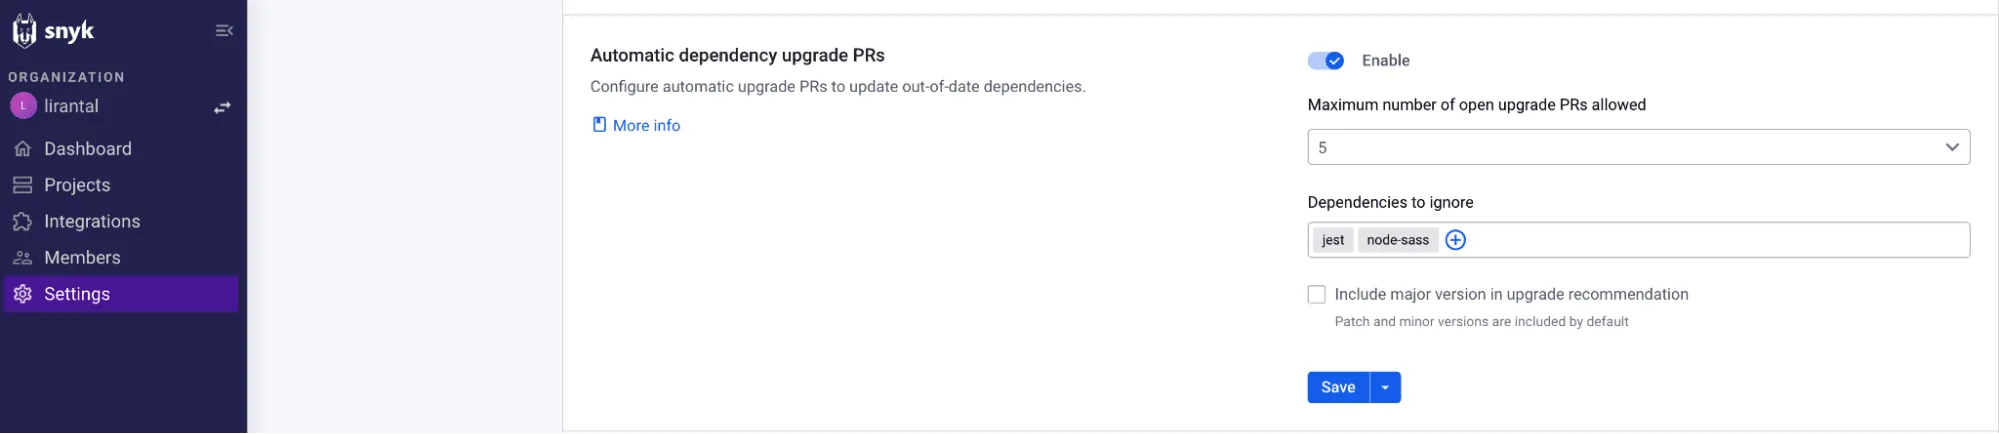 Automatic dependency upgrade PRs in snyk interface